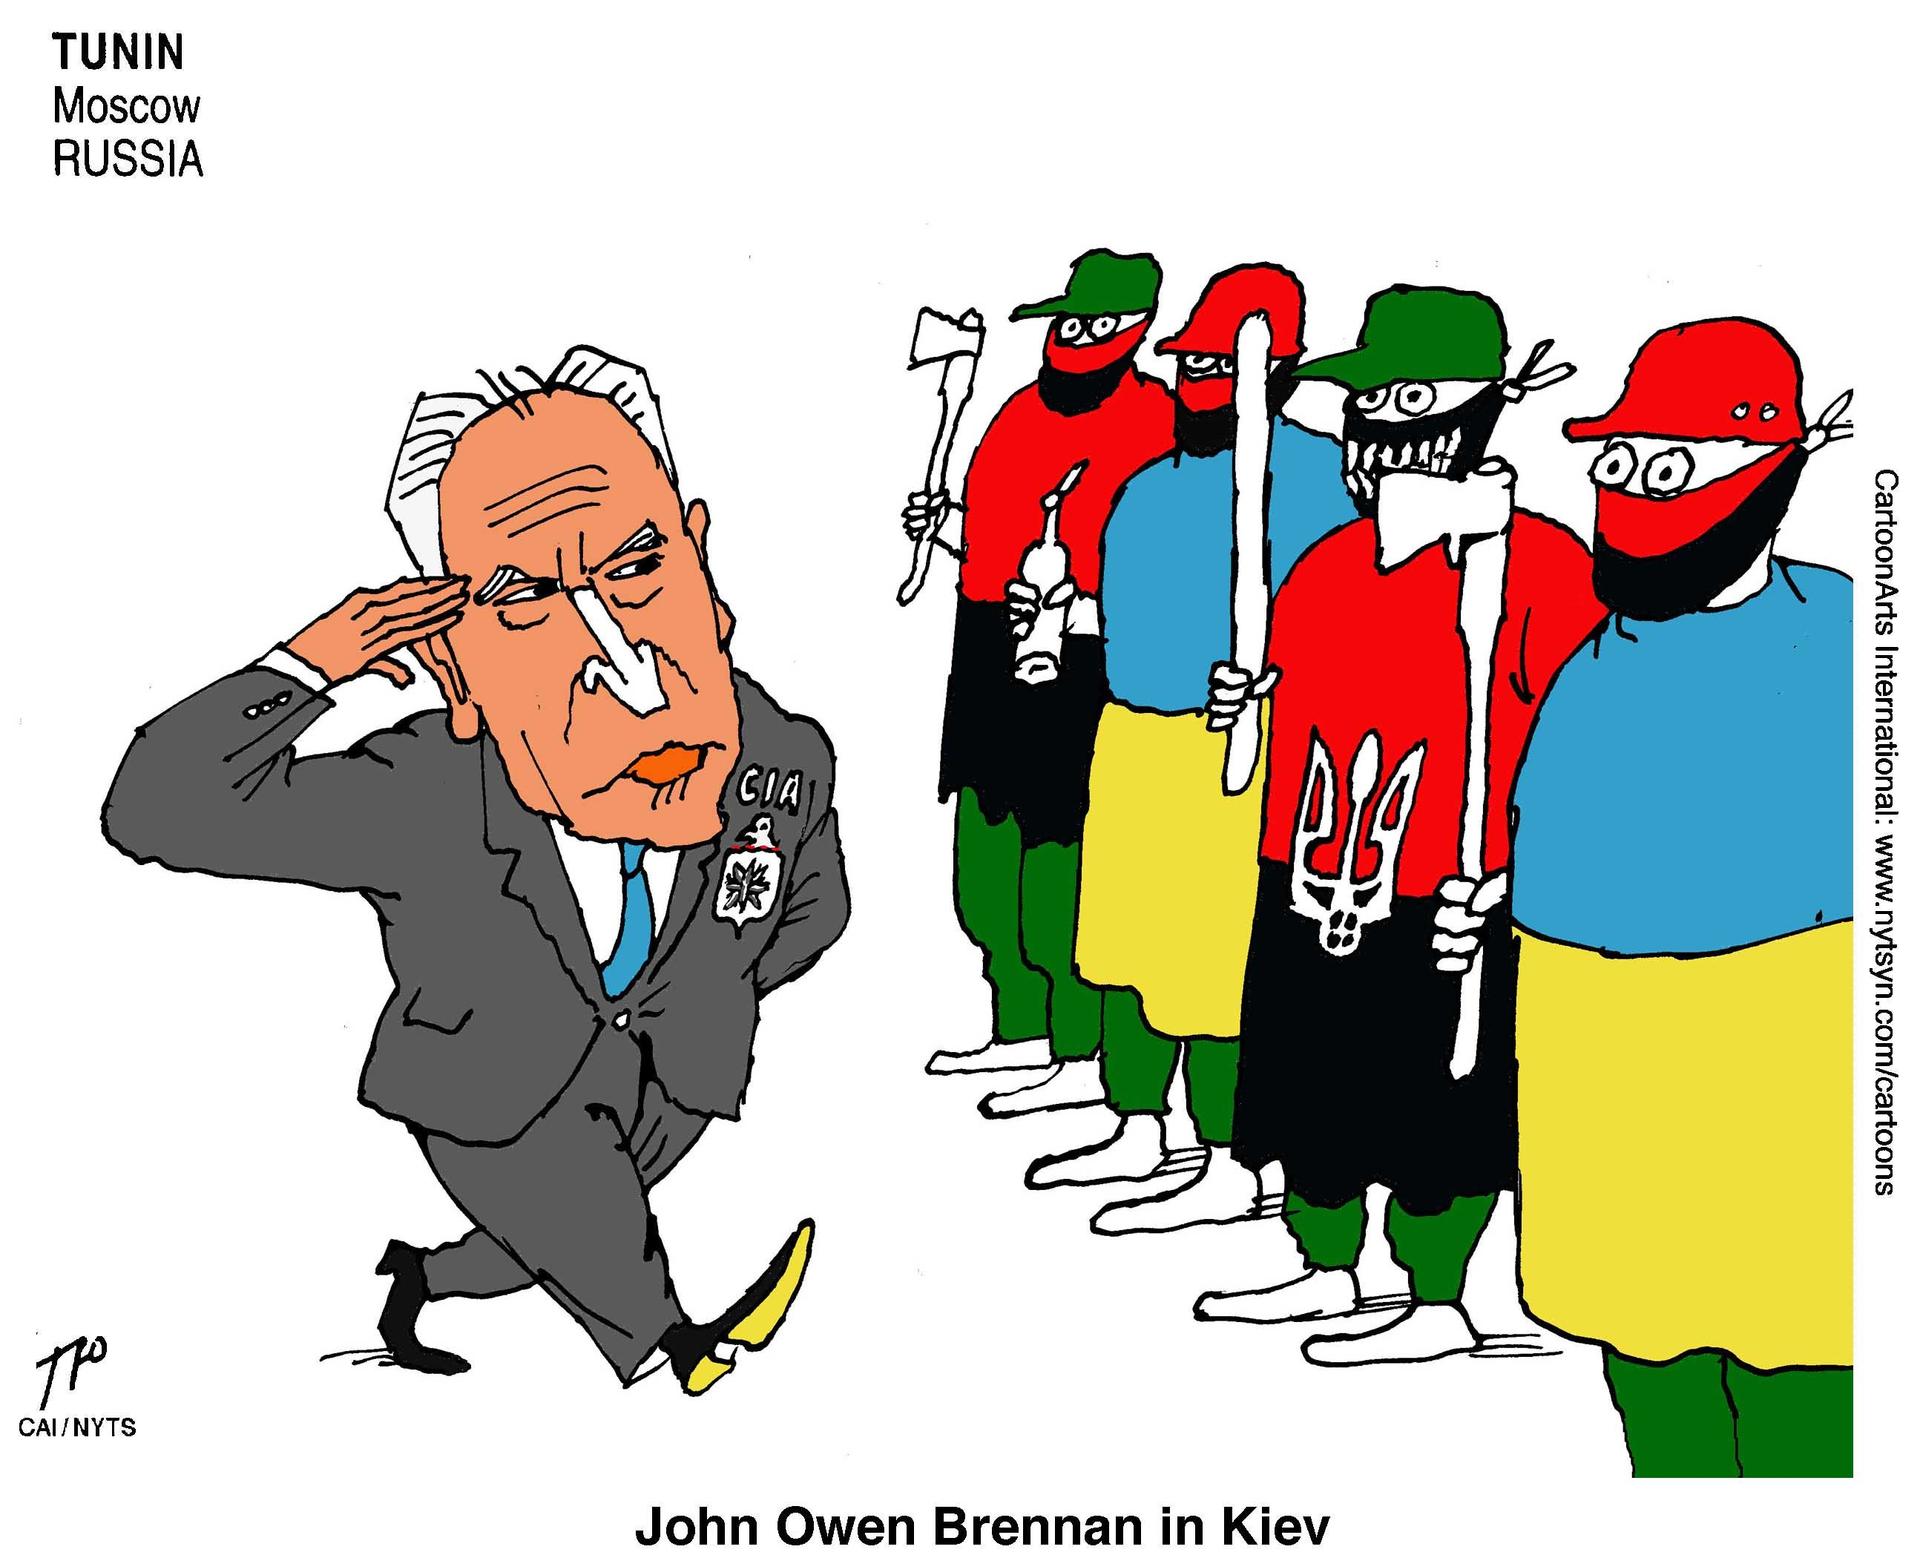 The White house confirmed that CIA chief John Brennan visited Kiev last weekend. Russian cartoonist Sergei Tunin shows him checking out Ukraine's defenders.